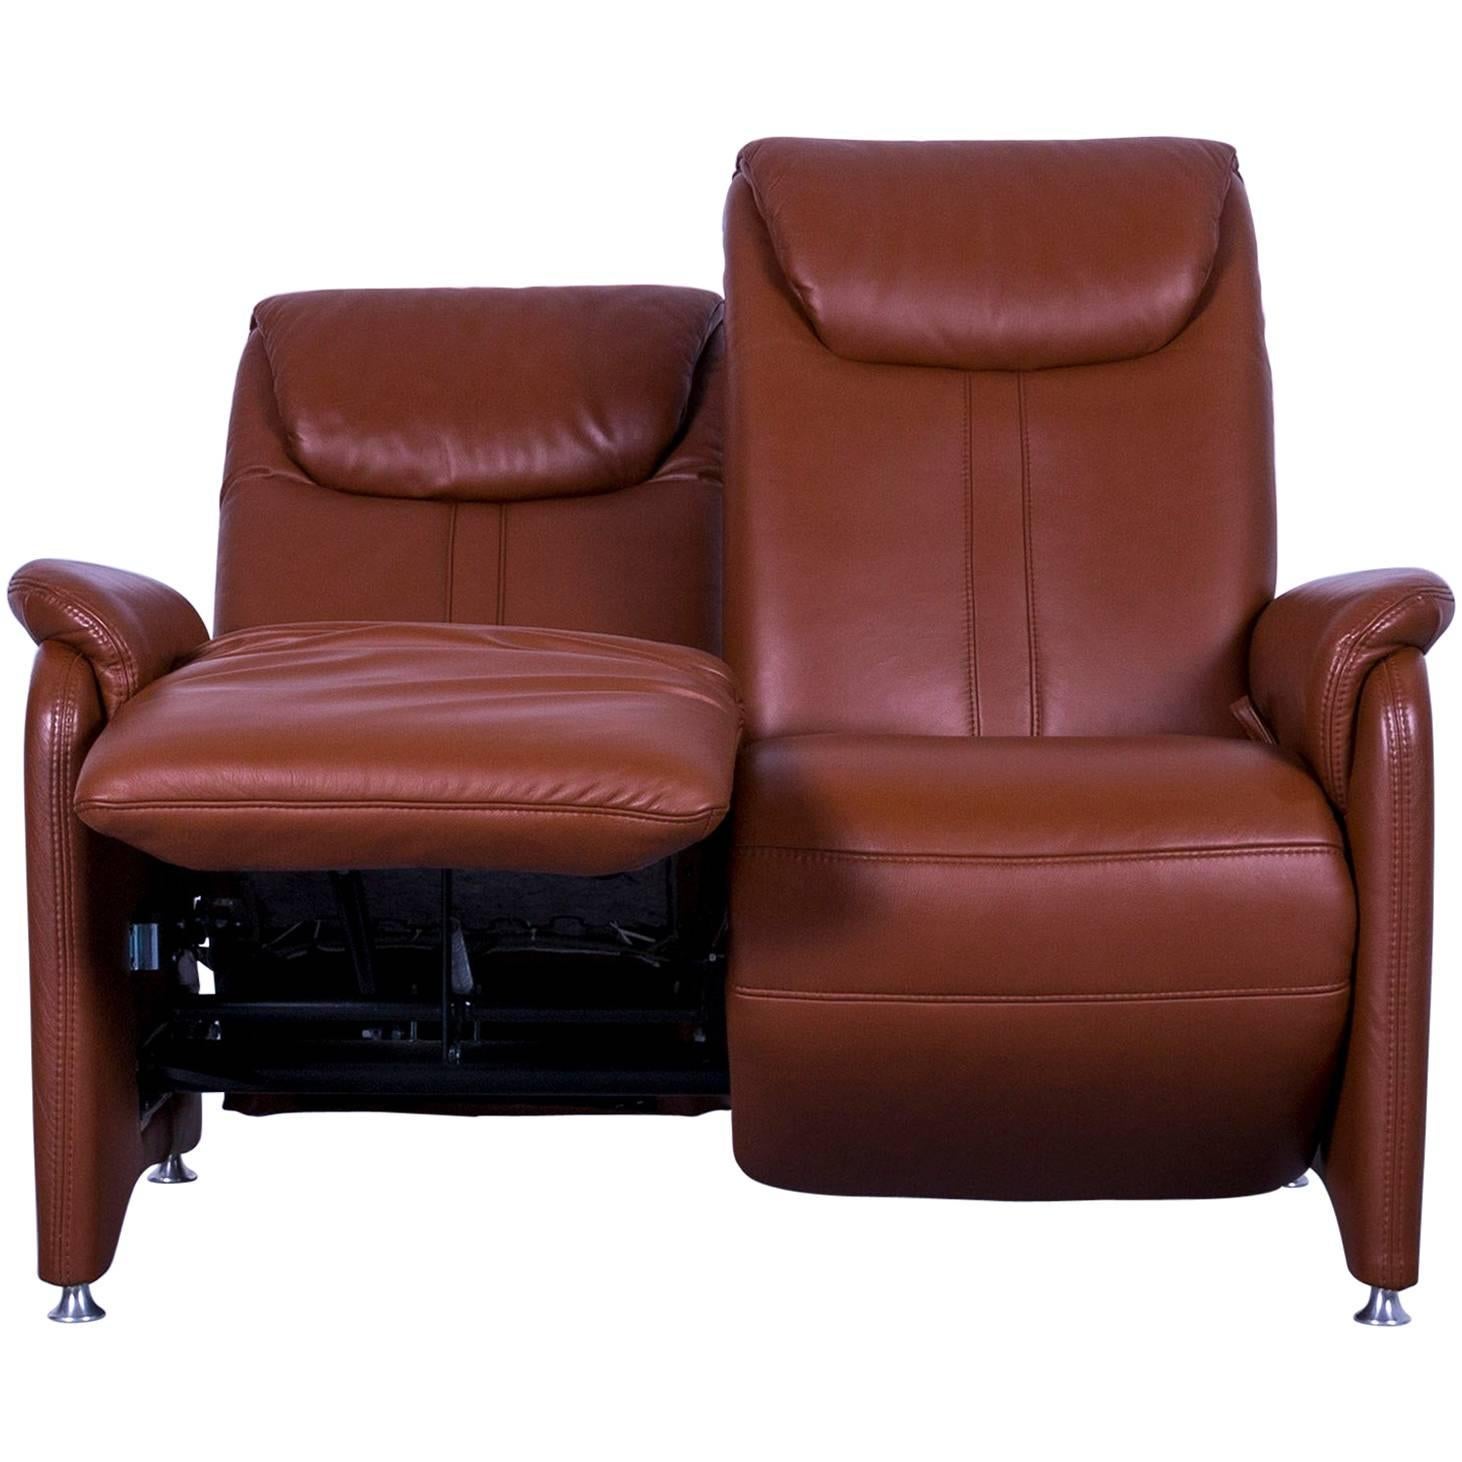 Willy Schillig Designer Leather Sofa Brown Two-Seat Recliner For Sale